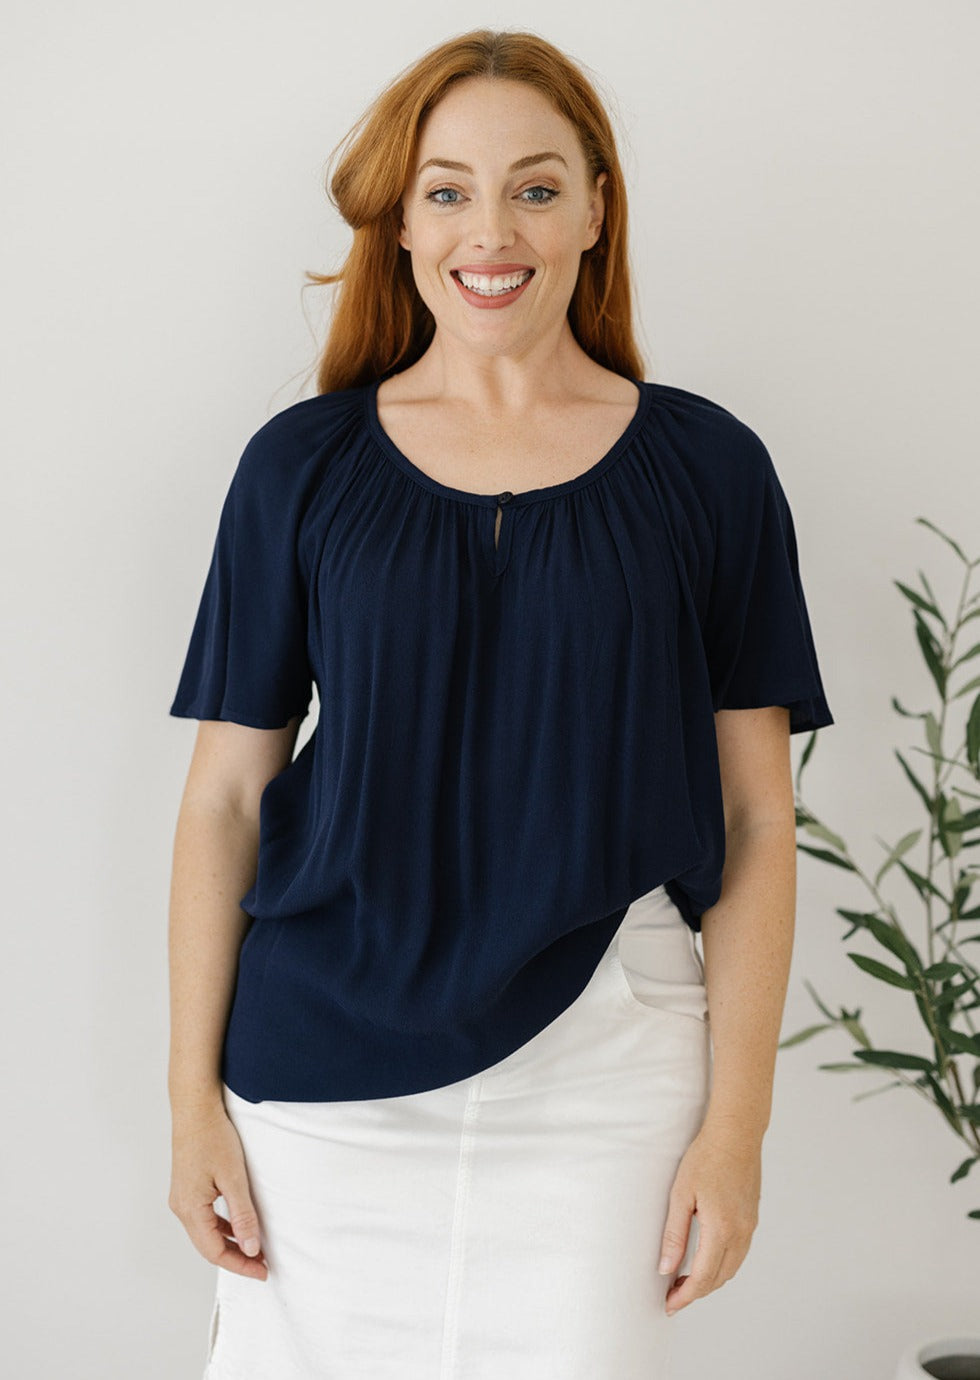 flowy navy blouse with sleeves for women